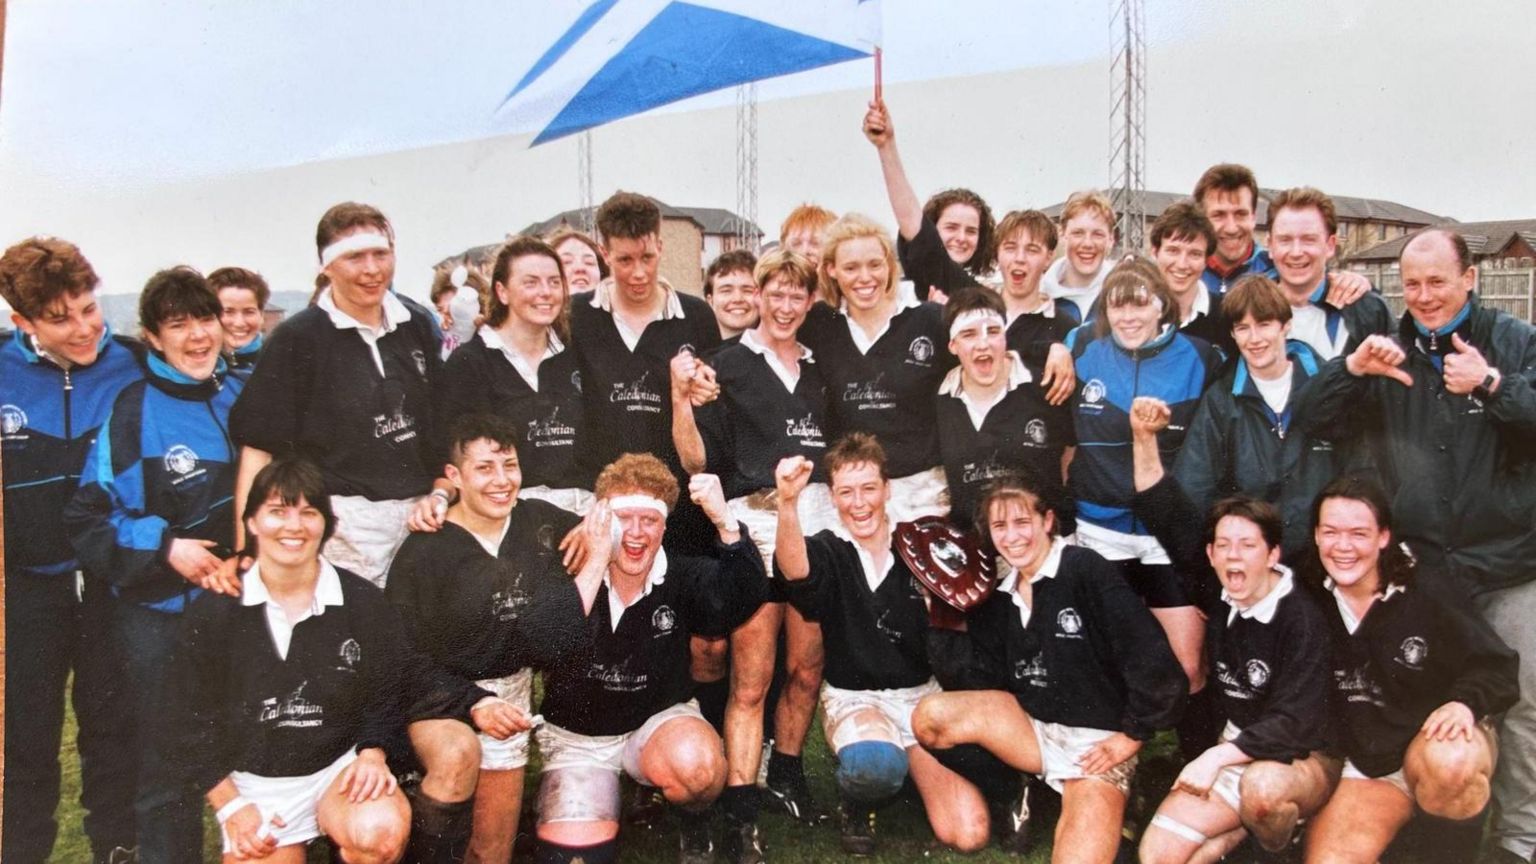 Scotland's women had only been together a year before the 1994 tournament